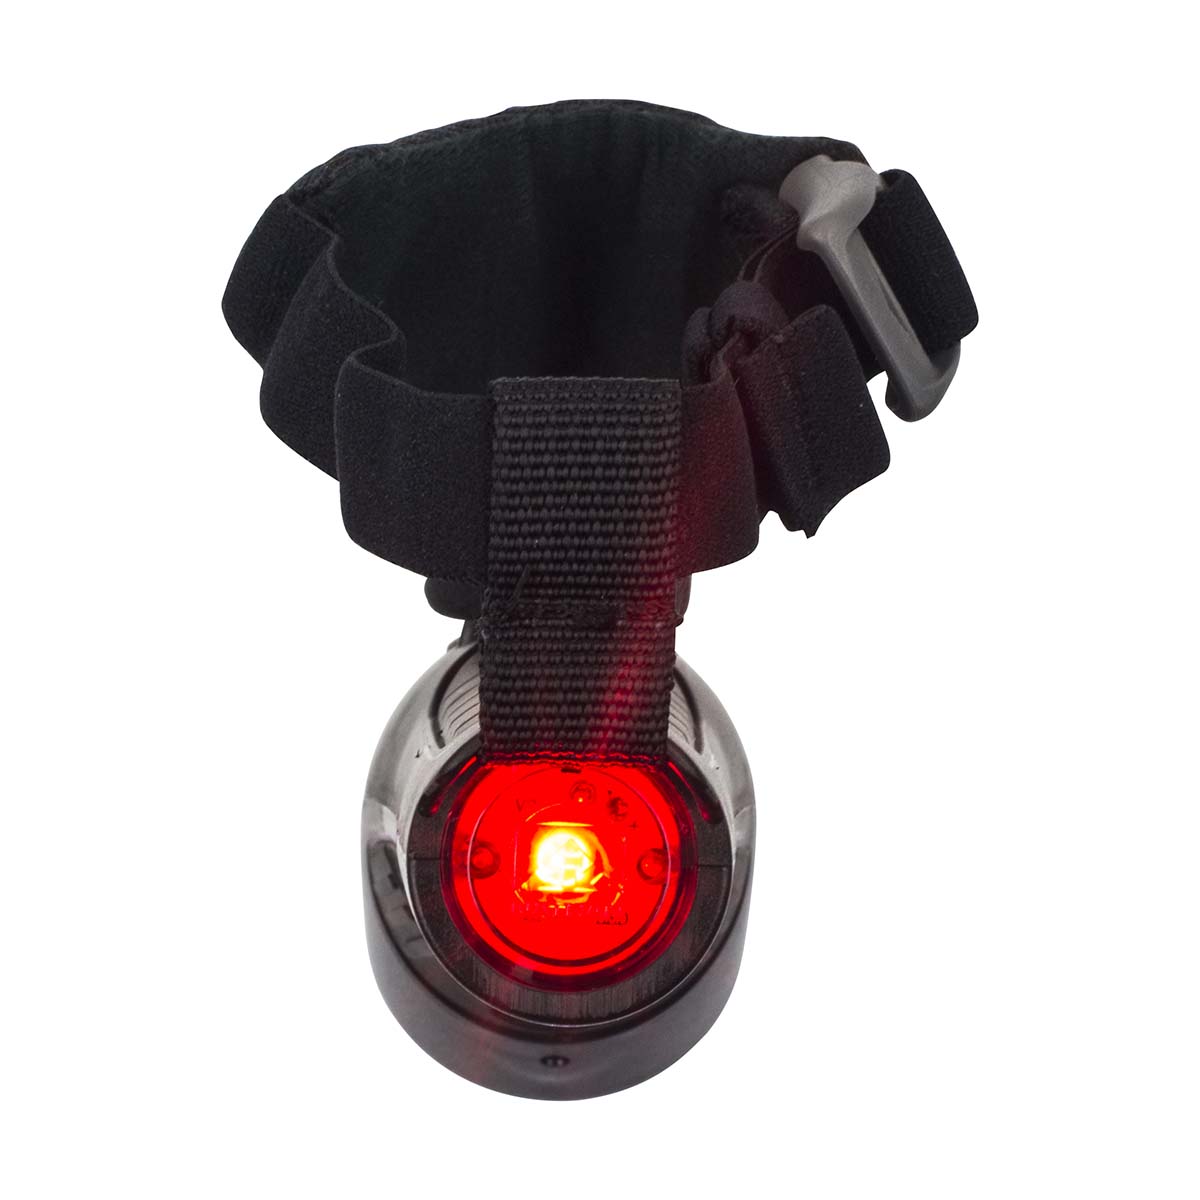 Nathan Zephyr Fire 300 Hand Torch LED Light, , large image number null